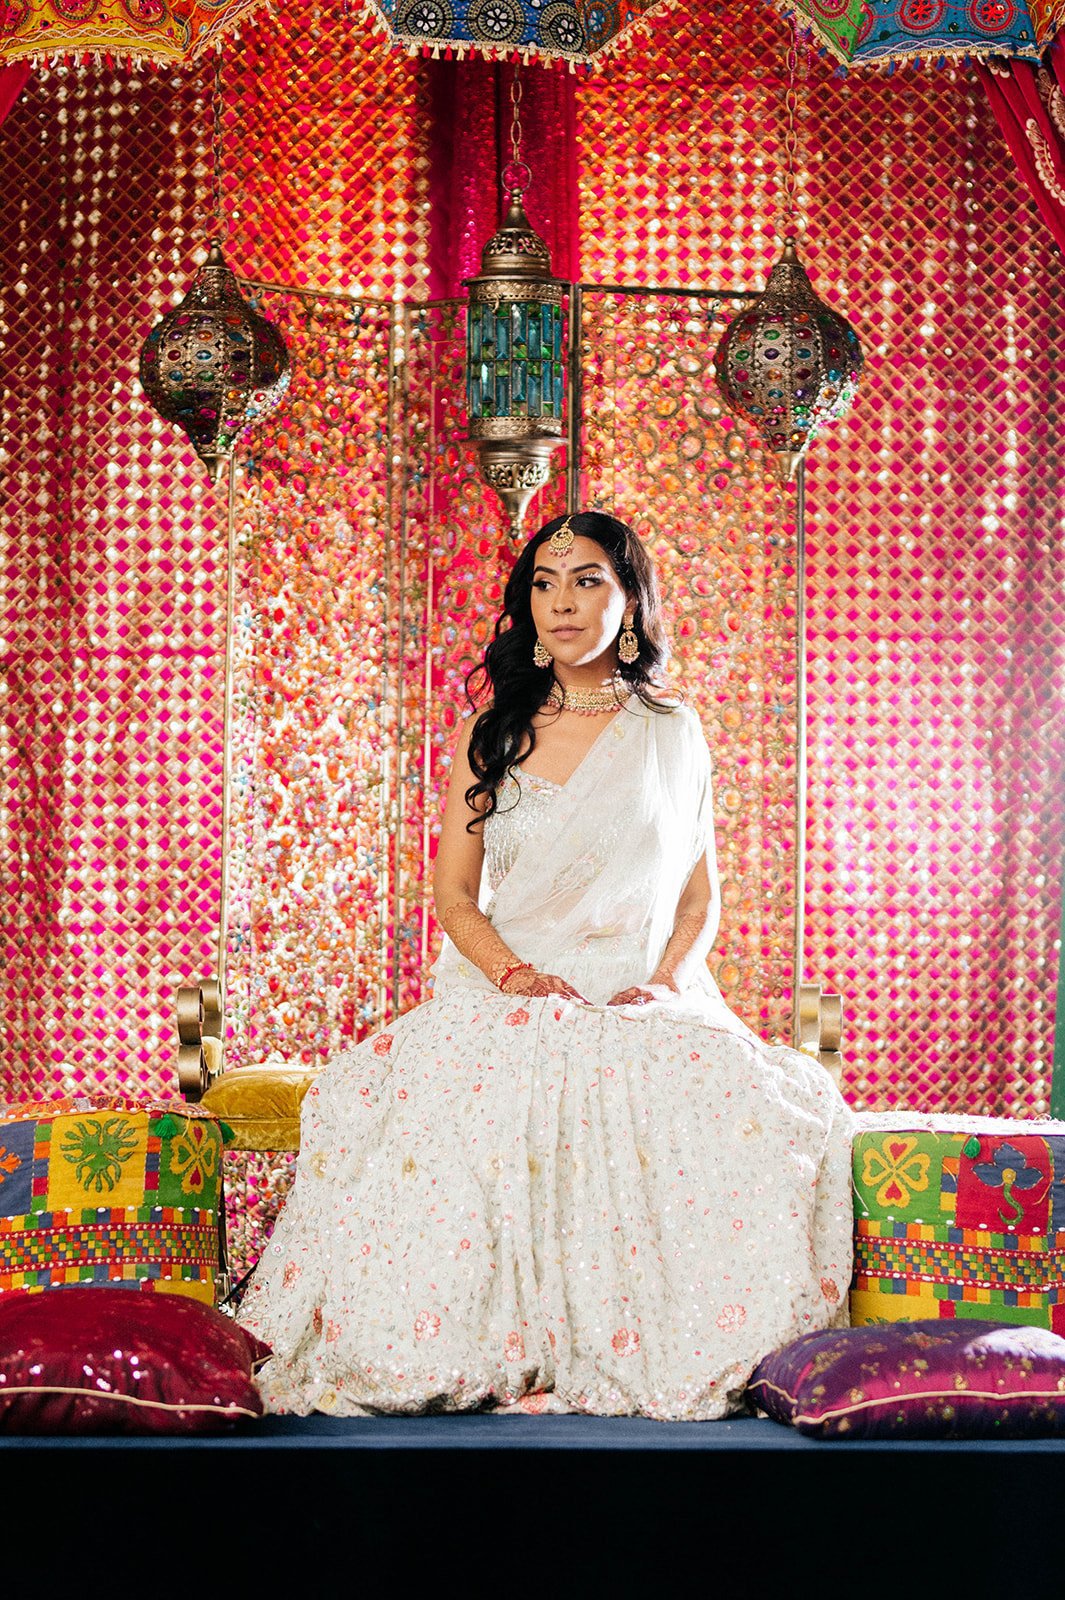 A bride poses on a stange, backlight, in a colorful mayian ceremony